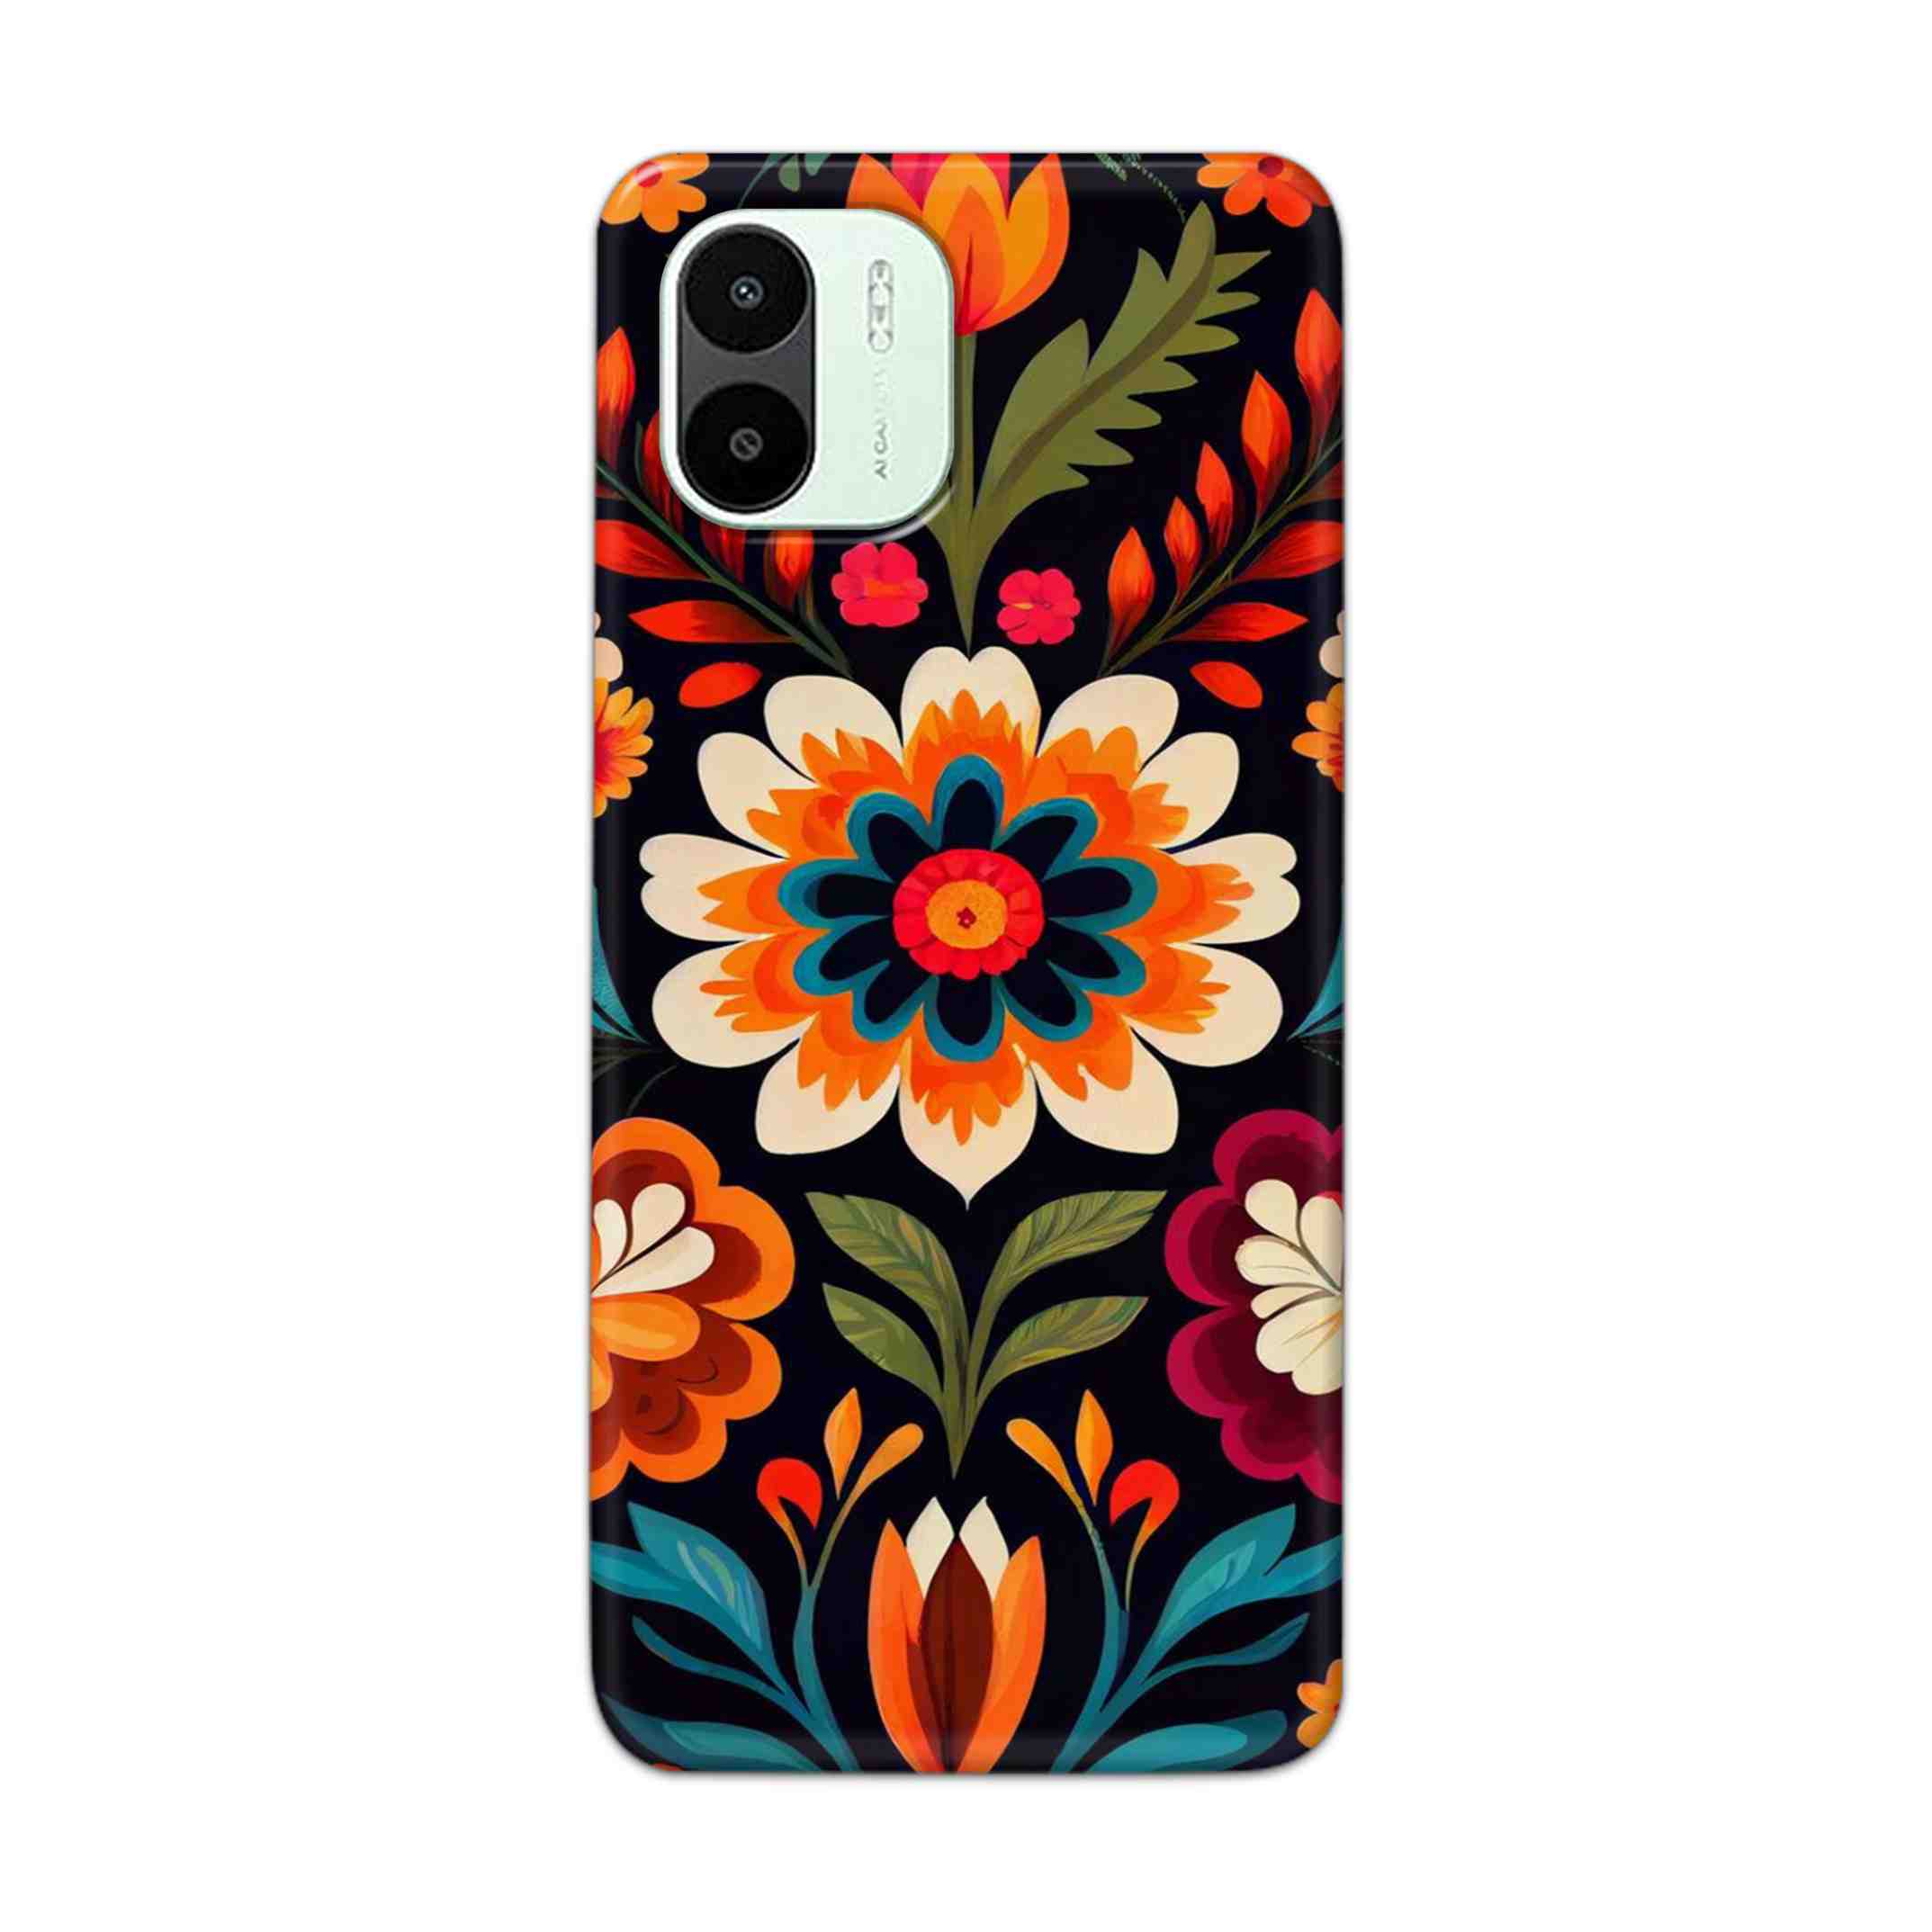 Buy Flower Hard Back Mobile Phone Case Cover For Xiaomi Redmi A1 5G Online